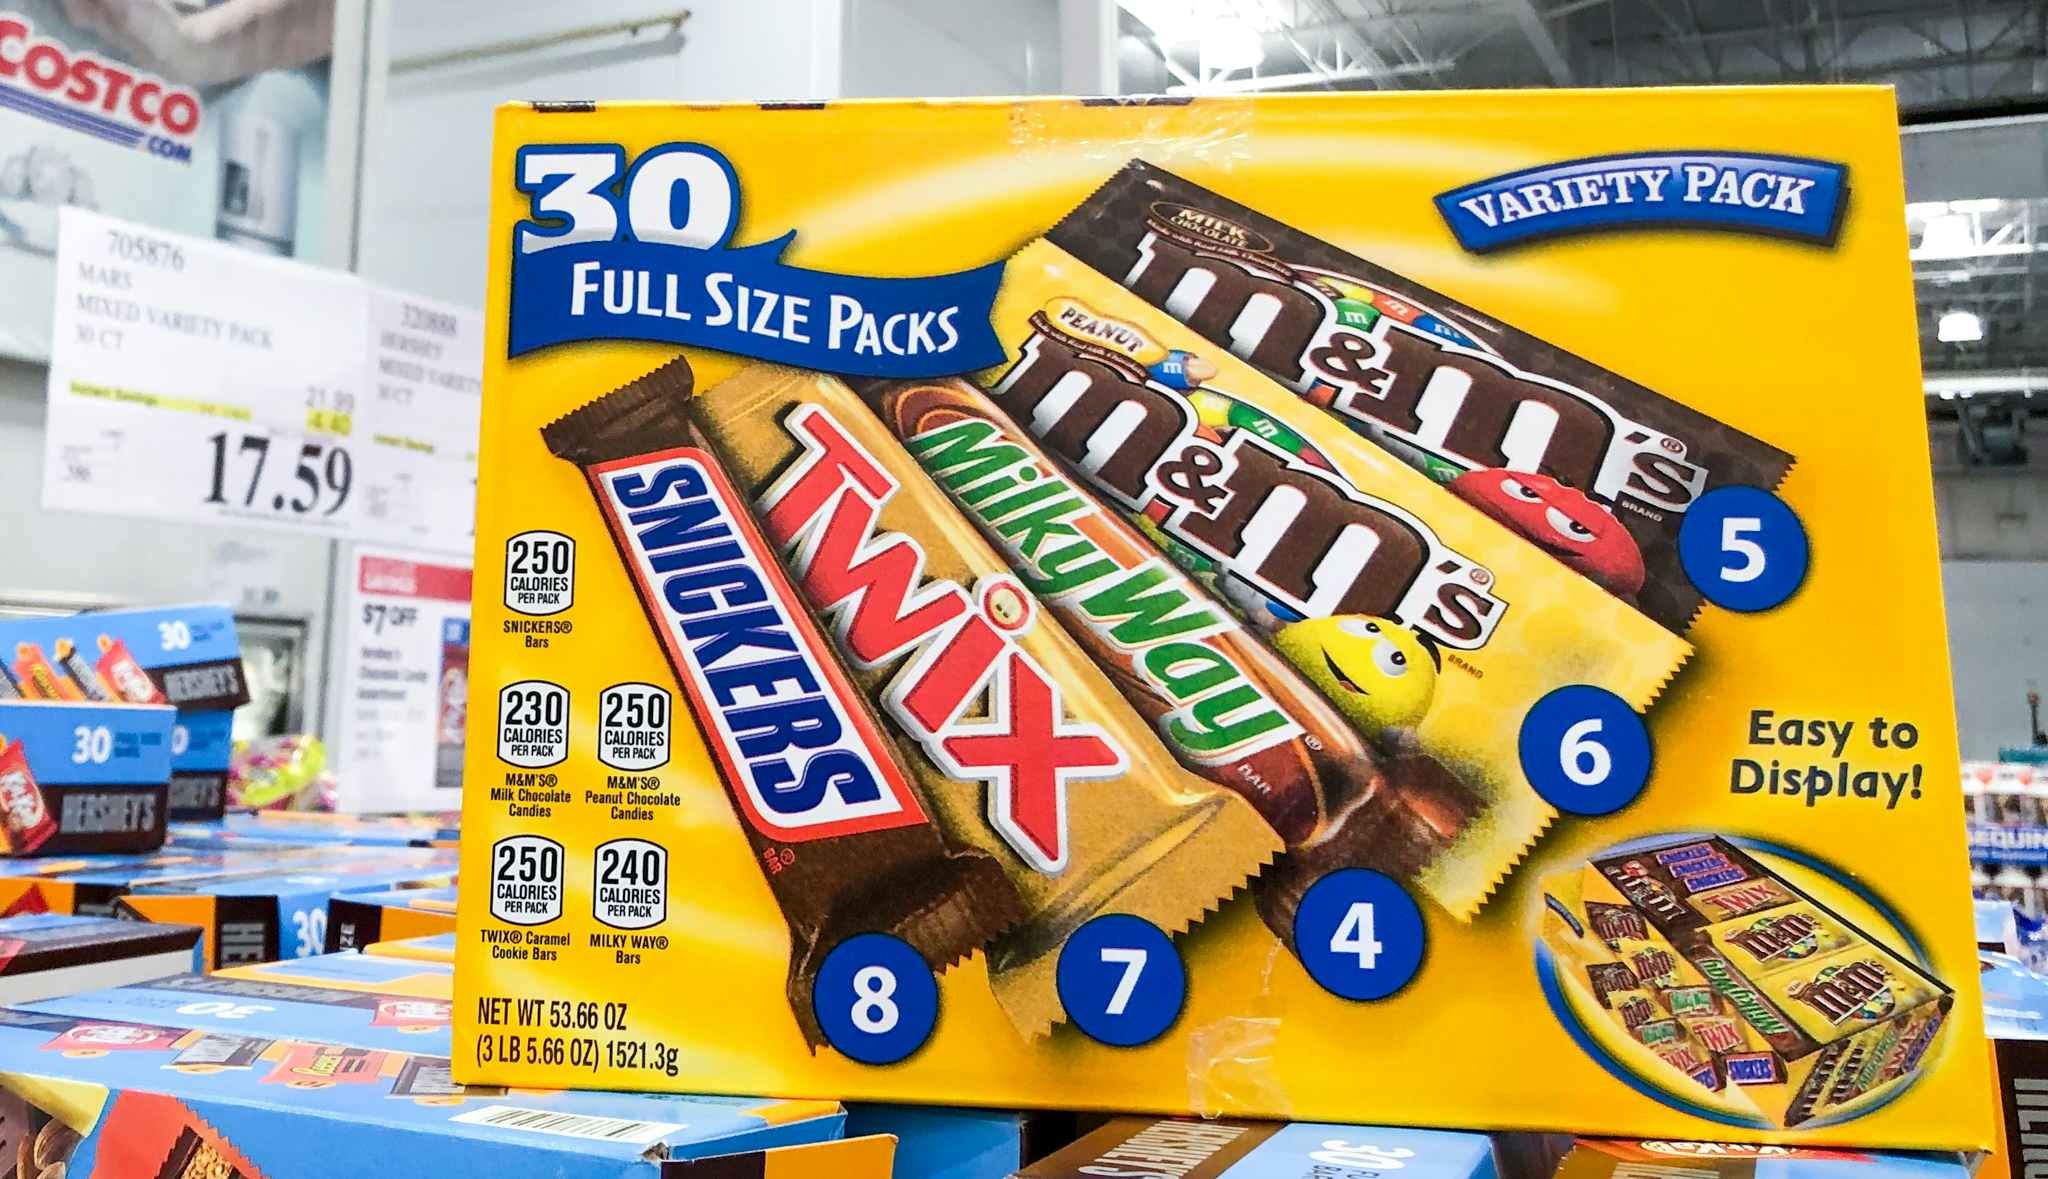 Costco Buys - Hershey's and Mars full sized candy bar